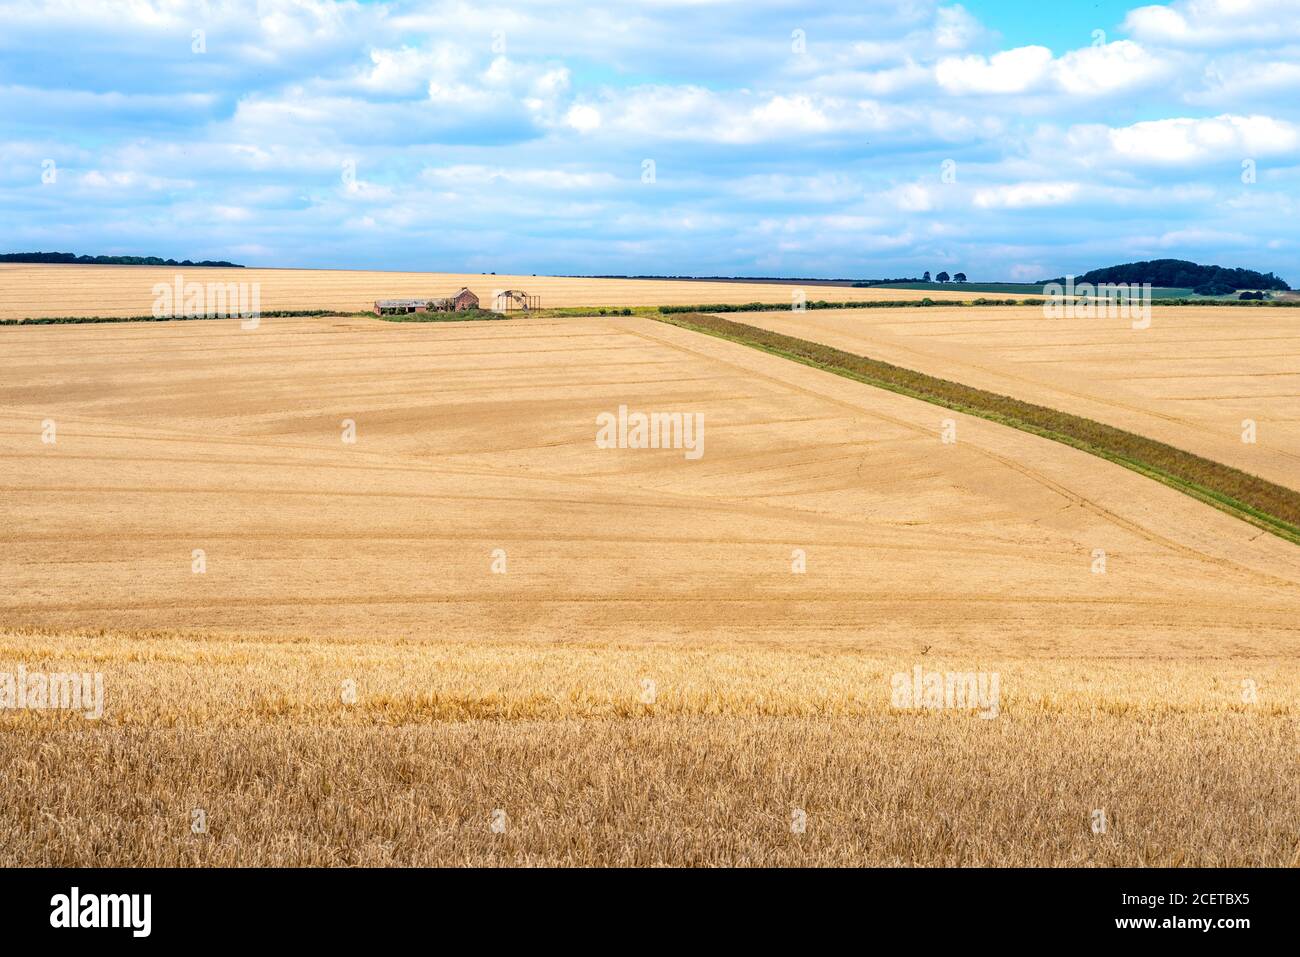 Colourful landscape view over rolling hills and wheat fields on a sunny day with white clouds. Stock Photo